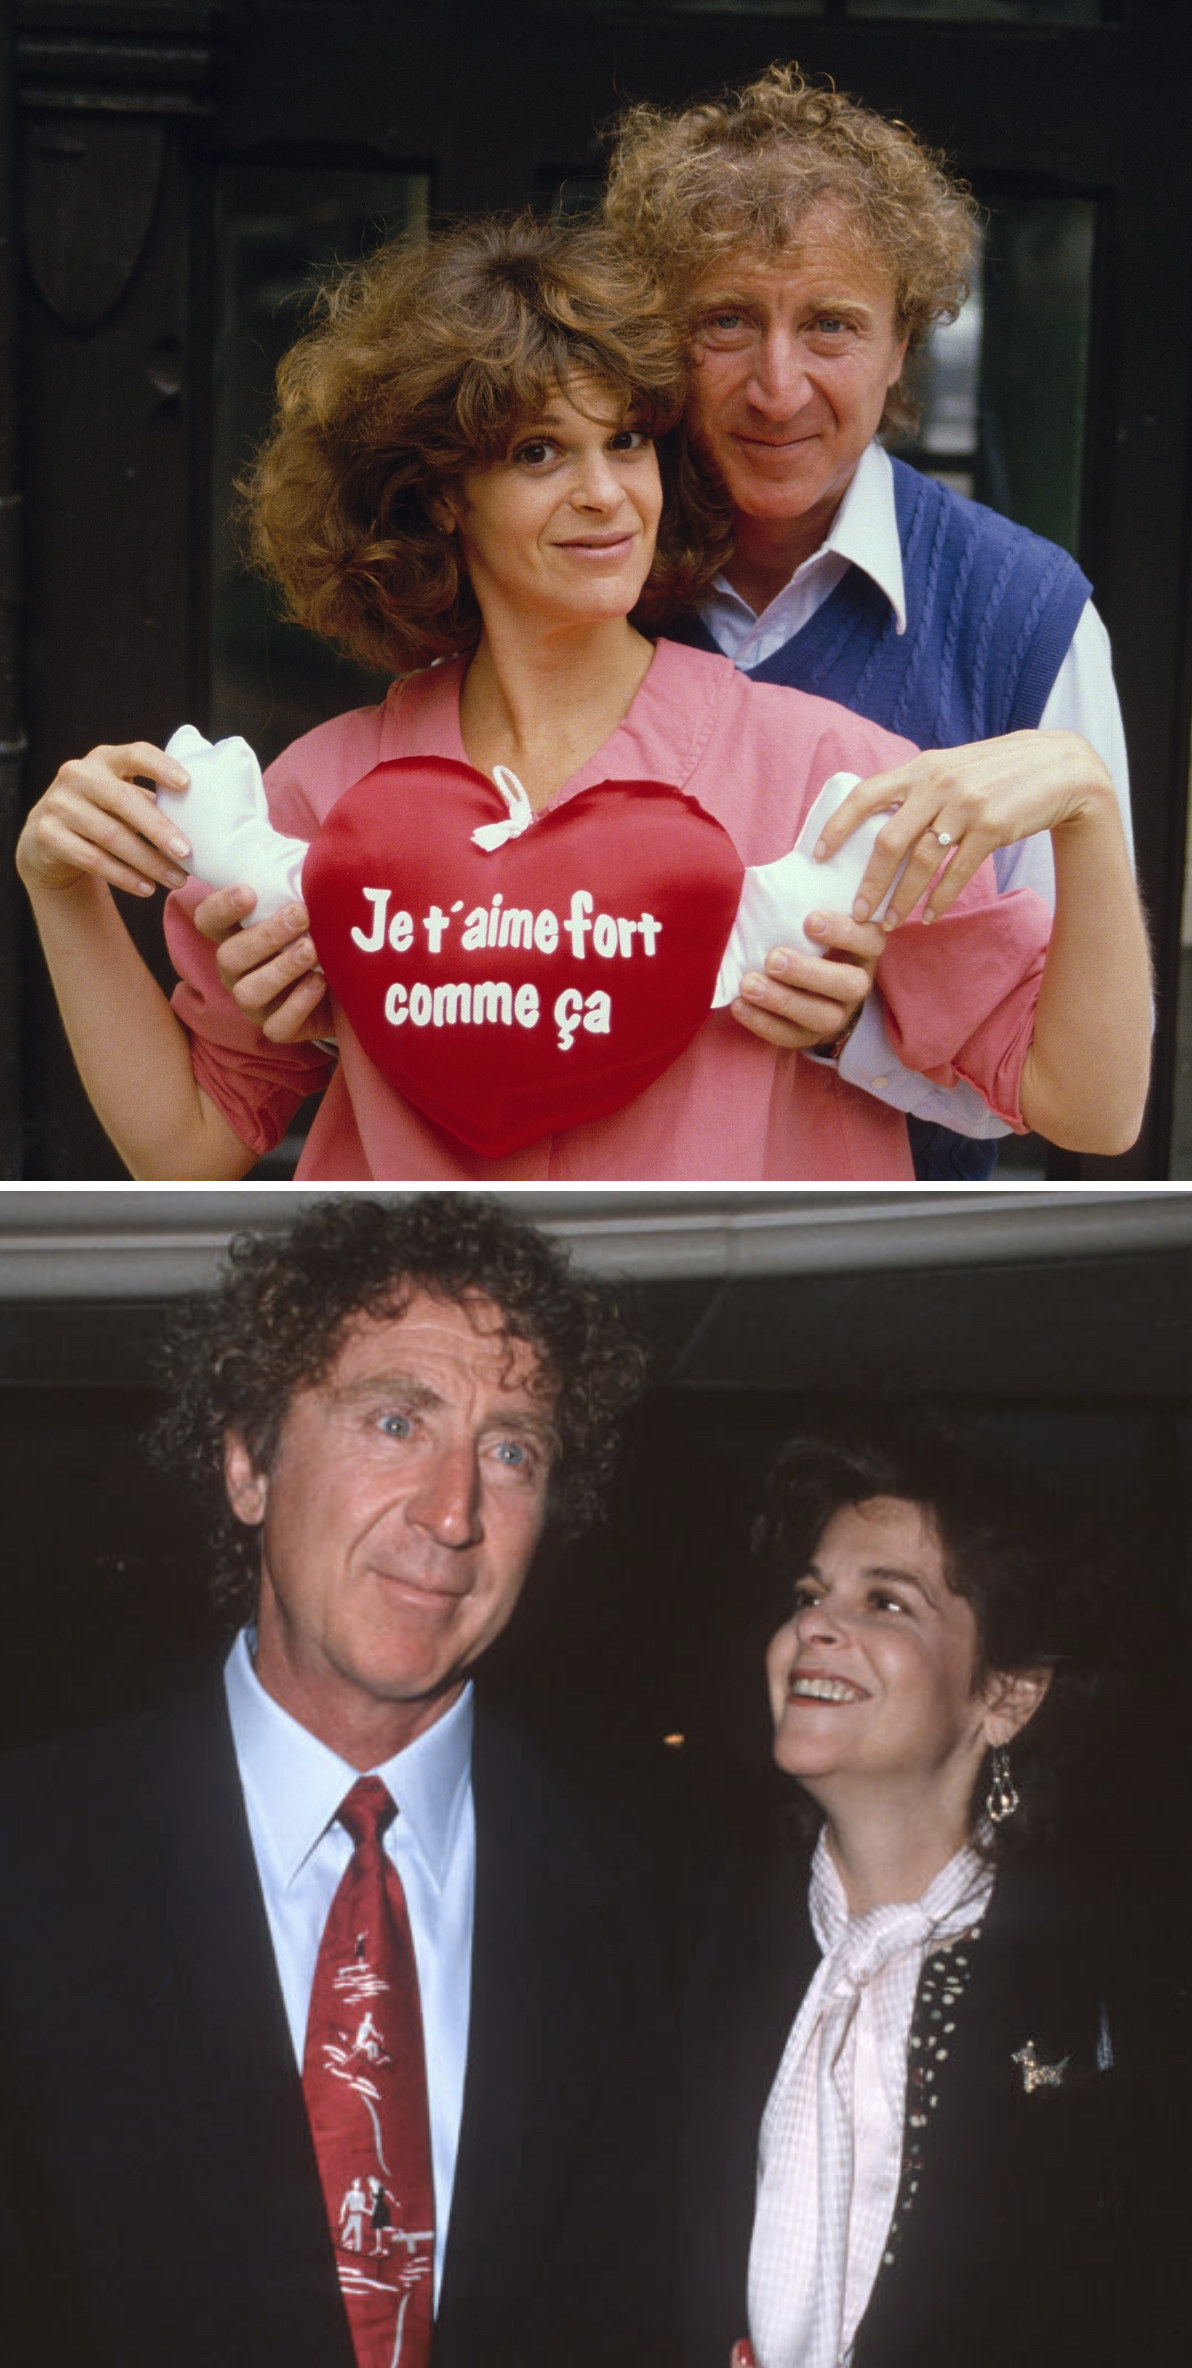 Wilder and Radner posing with a heart-shaped pillow at an event in 1984; Wilder and Radner at a wellness center benefit in 1989